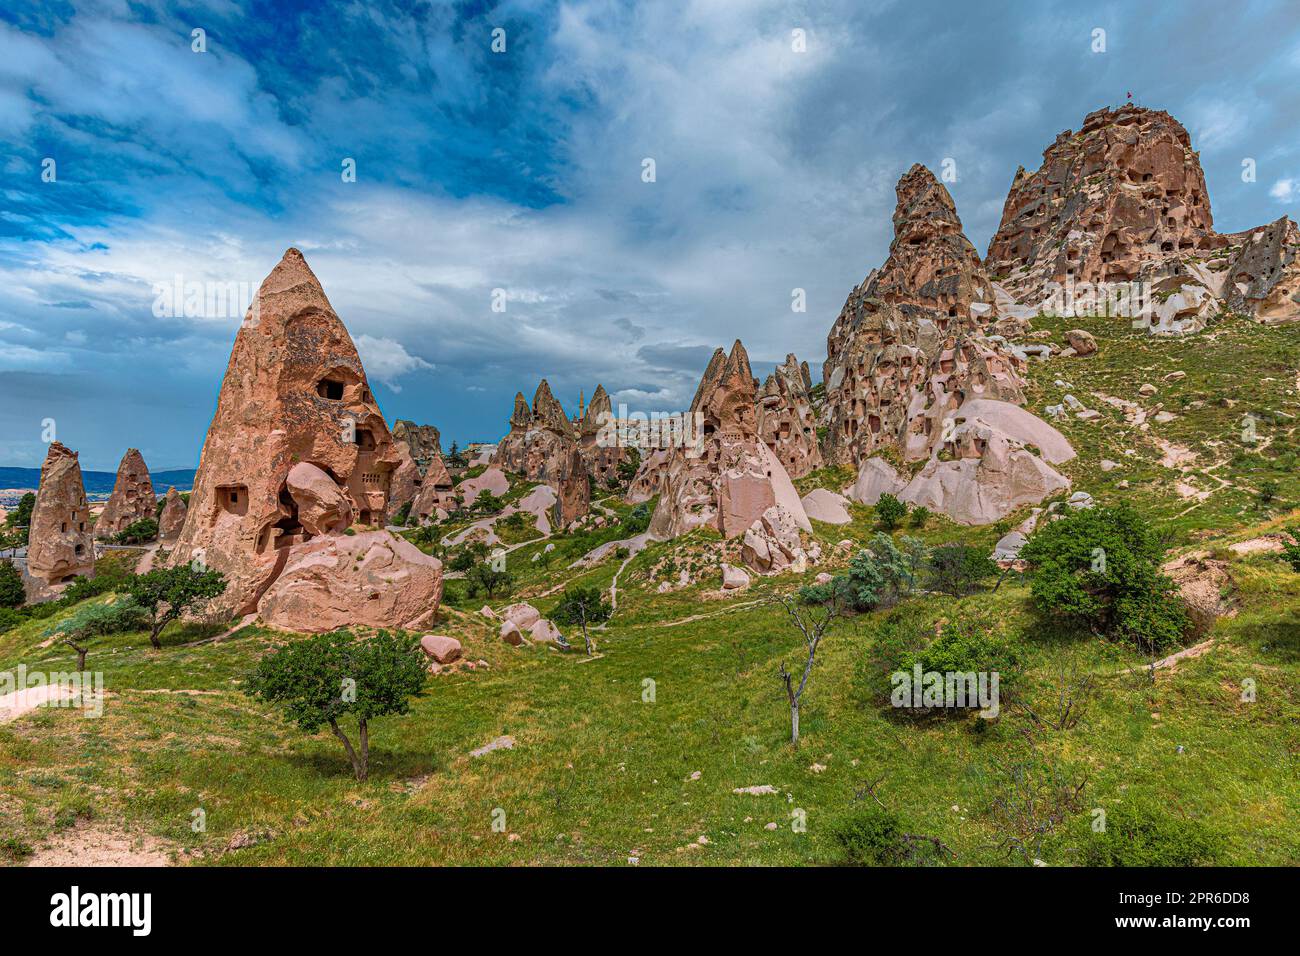 Uchisar Castle in Cappadocia, carved out of rock formations. Stock Photo